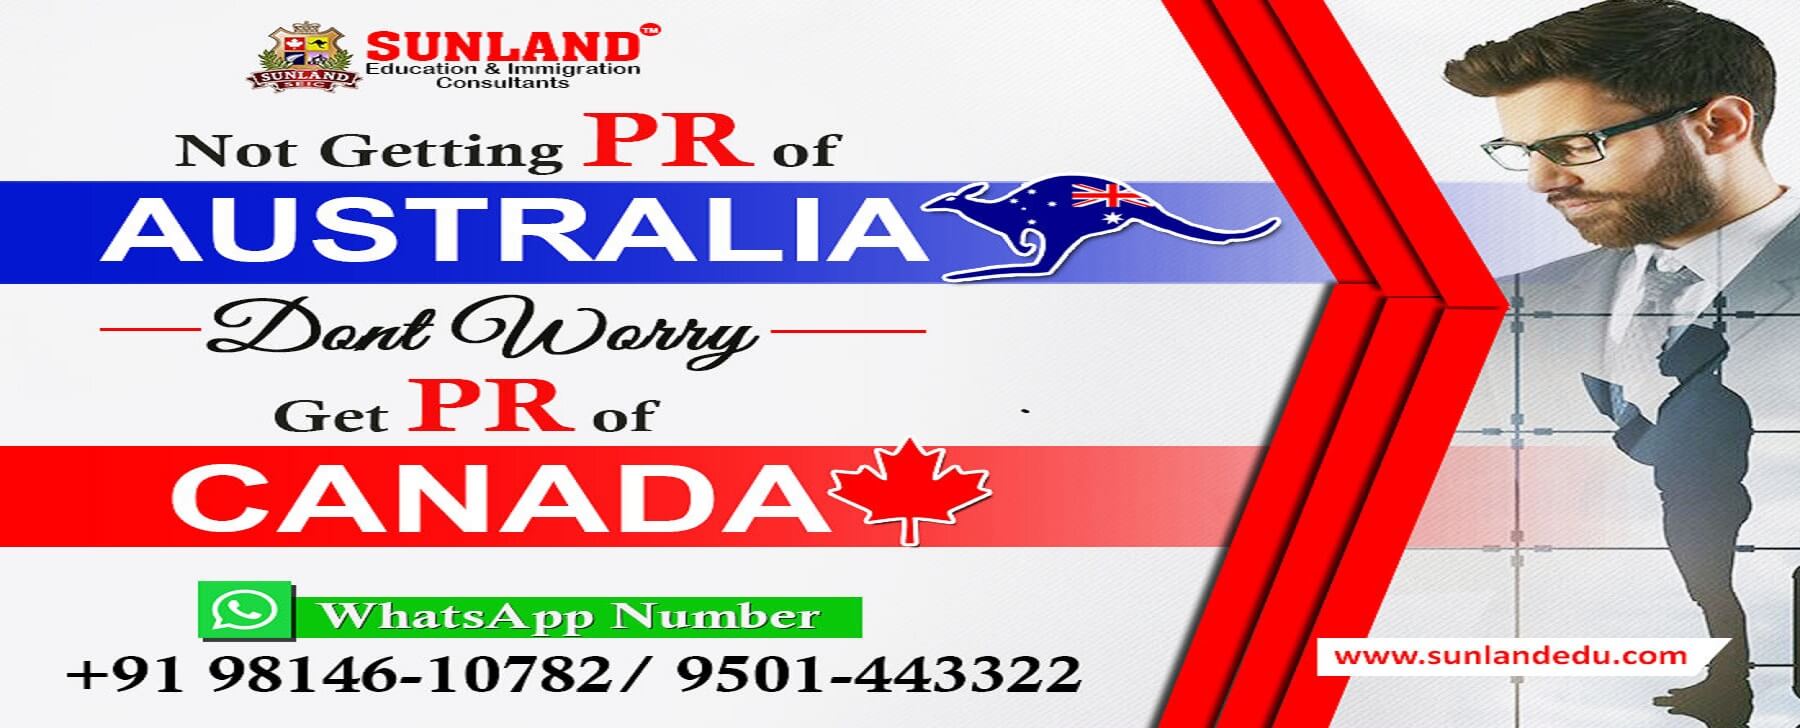 Migrate to Canada from Australia